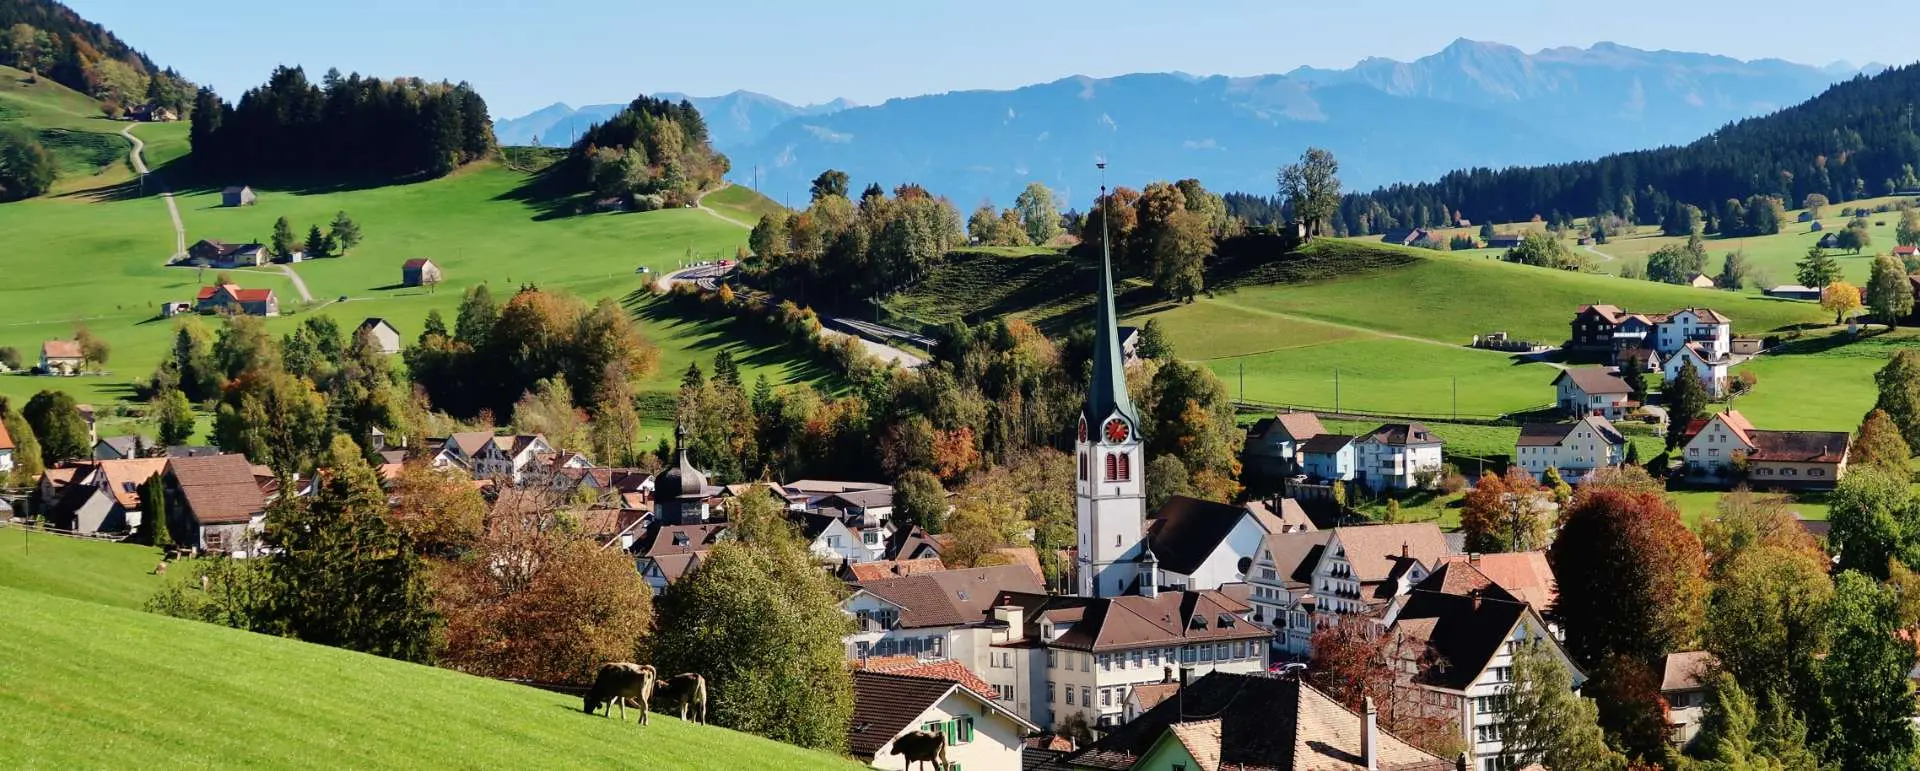 Appenzell - Self-catering group accommodation for travelers